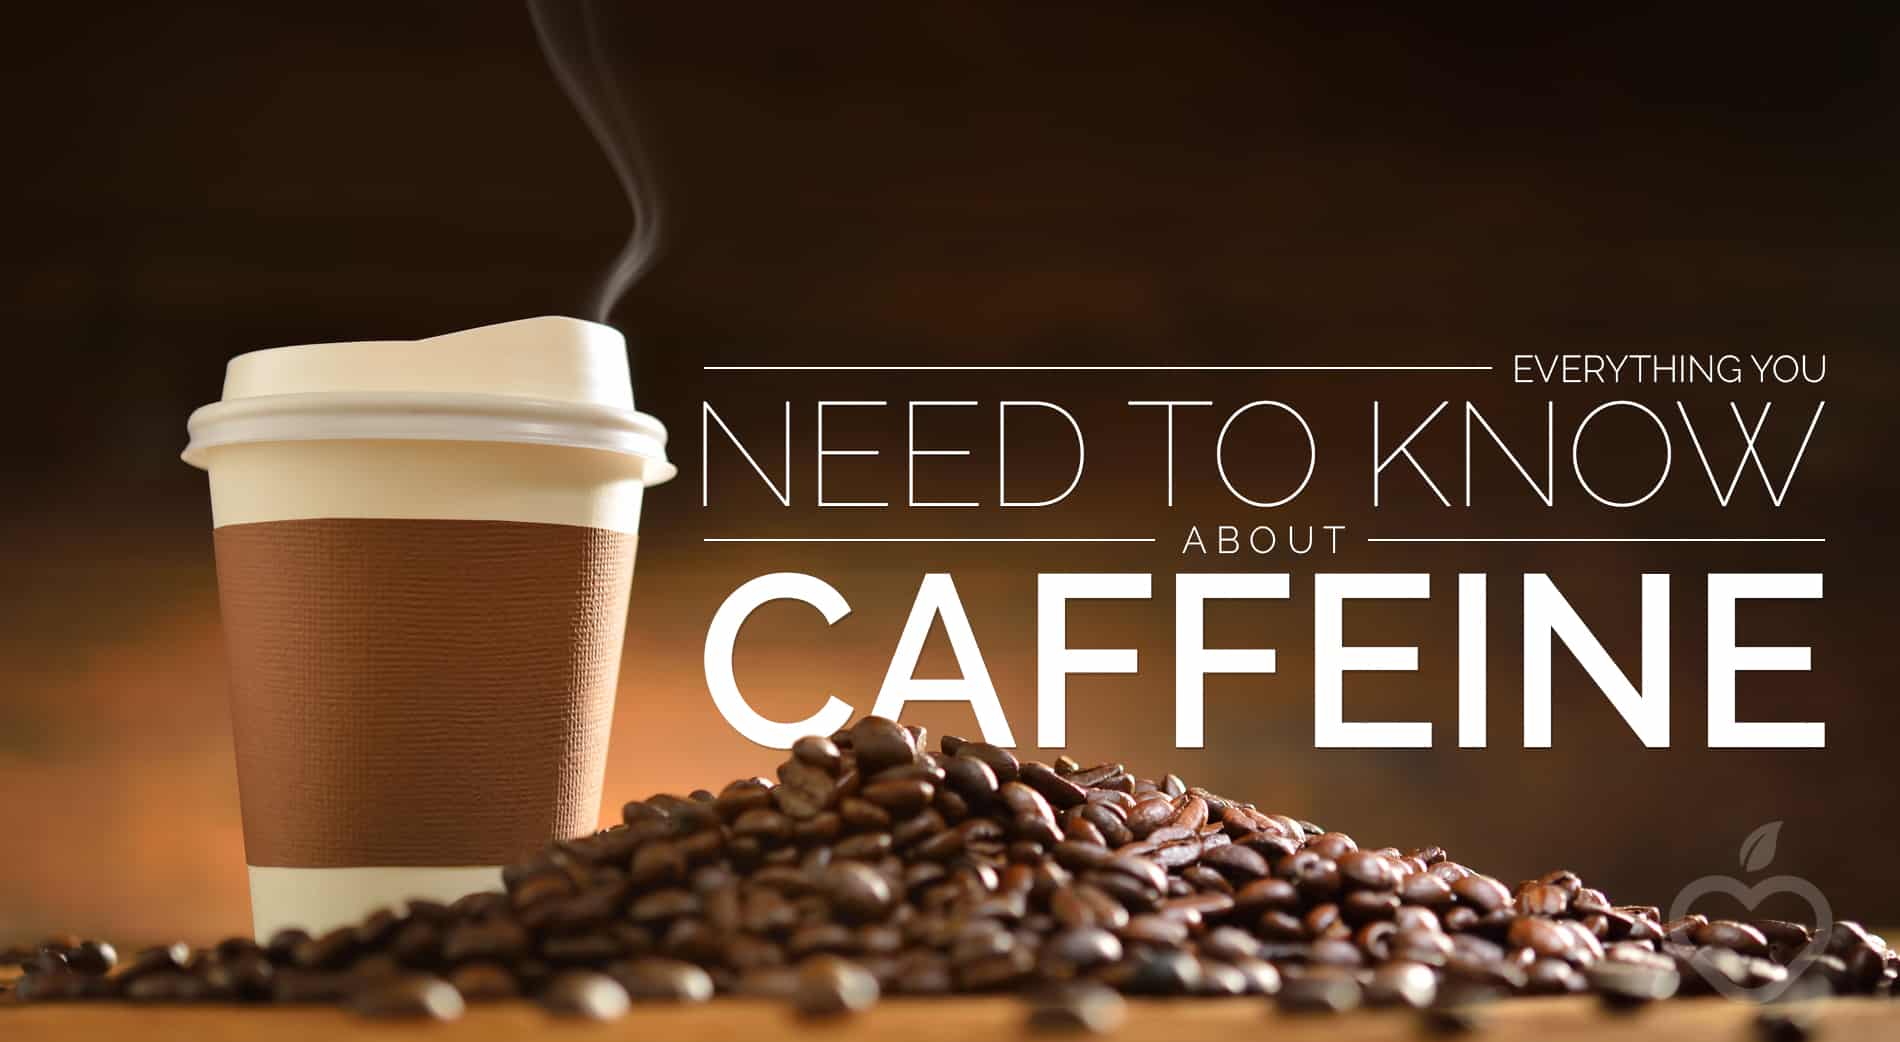 Everything You Need to Know About Caffeine